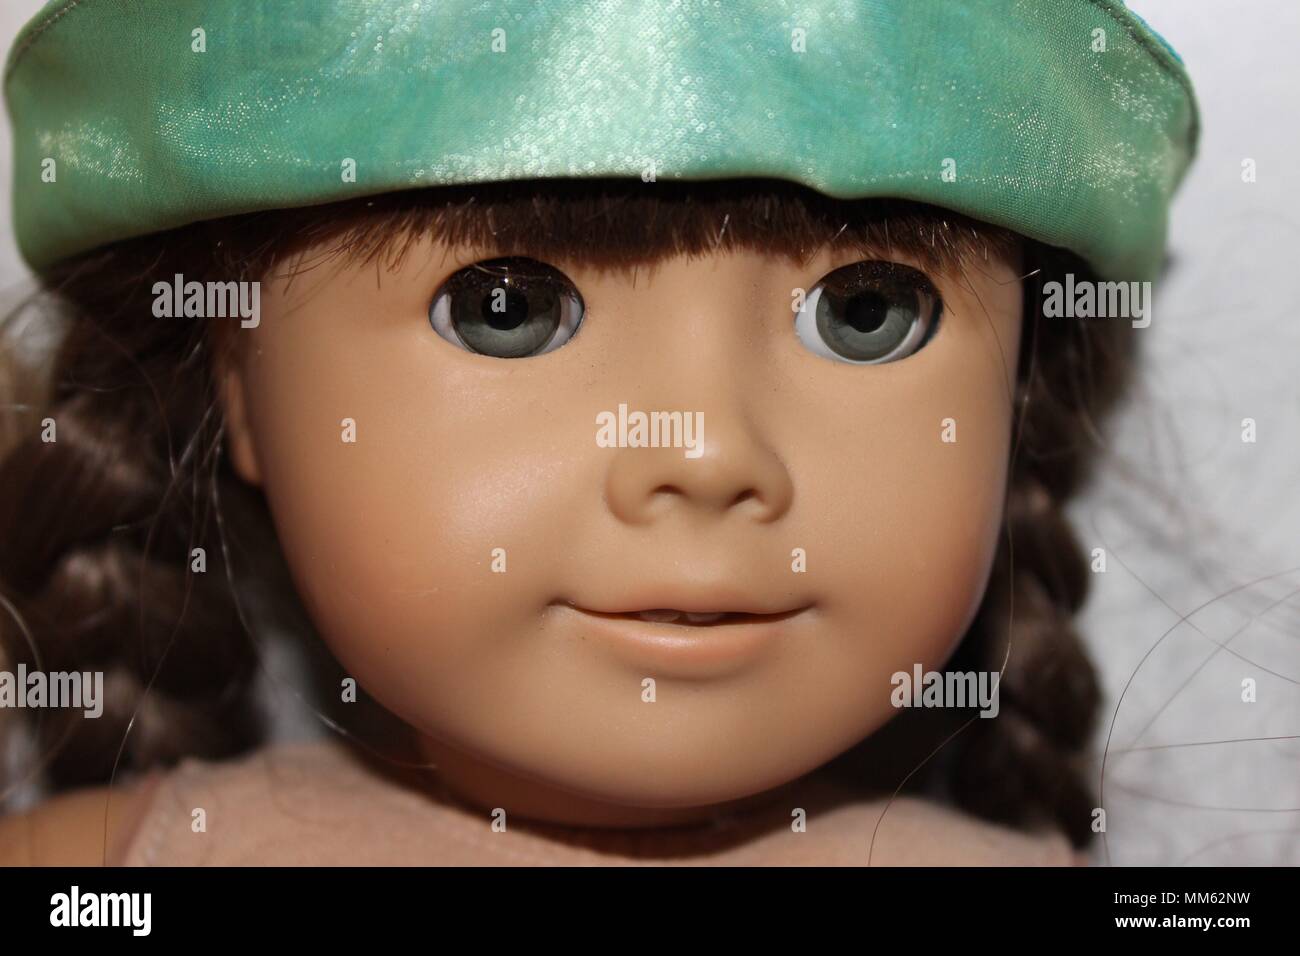 American Girl Doll (no brand shown) with a partially pictured green hat against a white background. Stock Photo